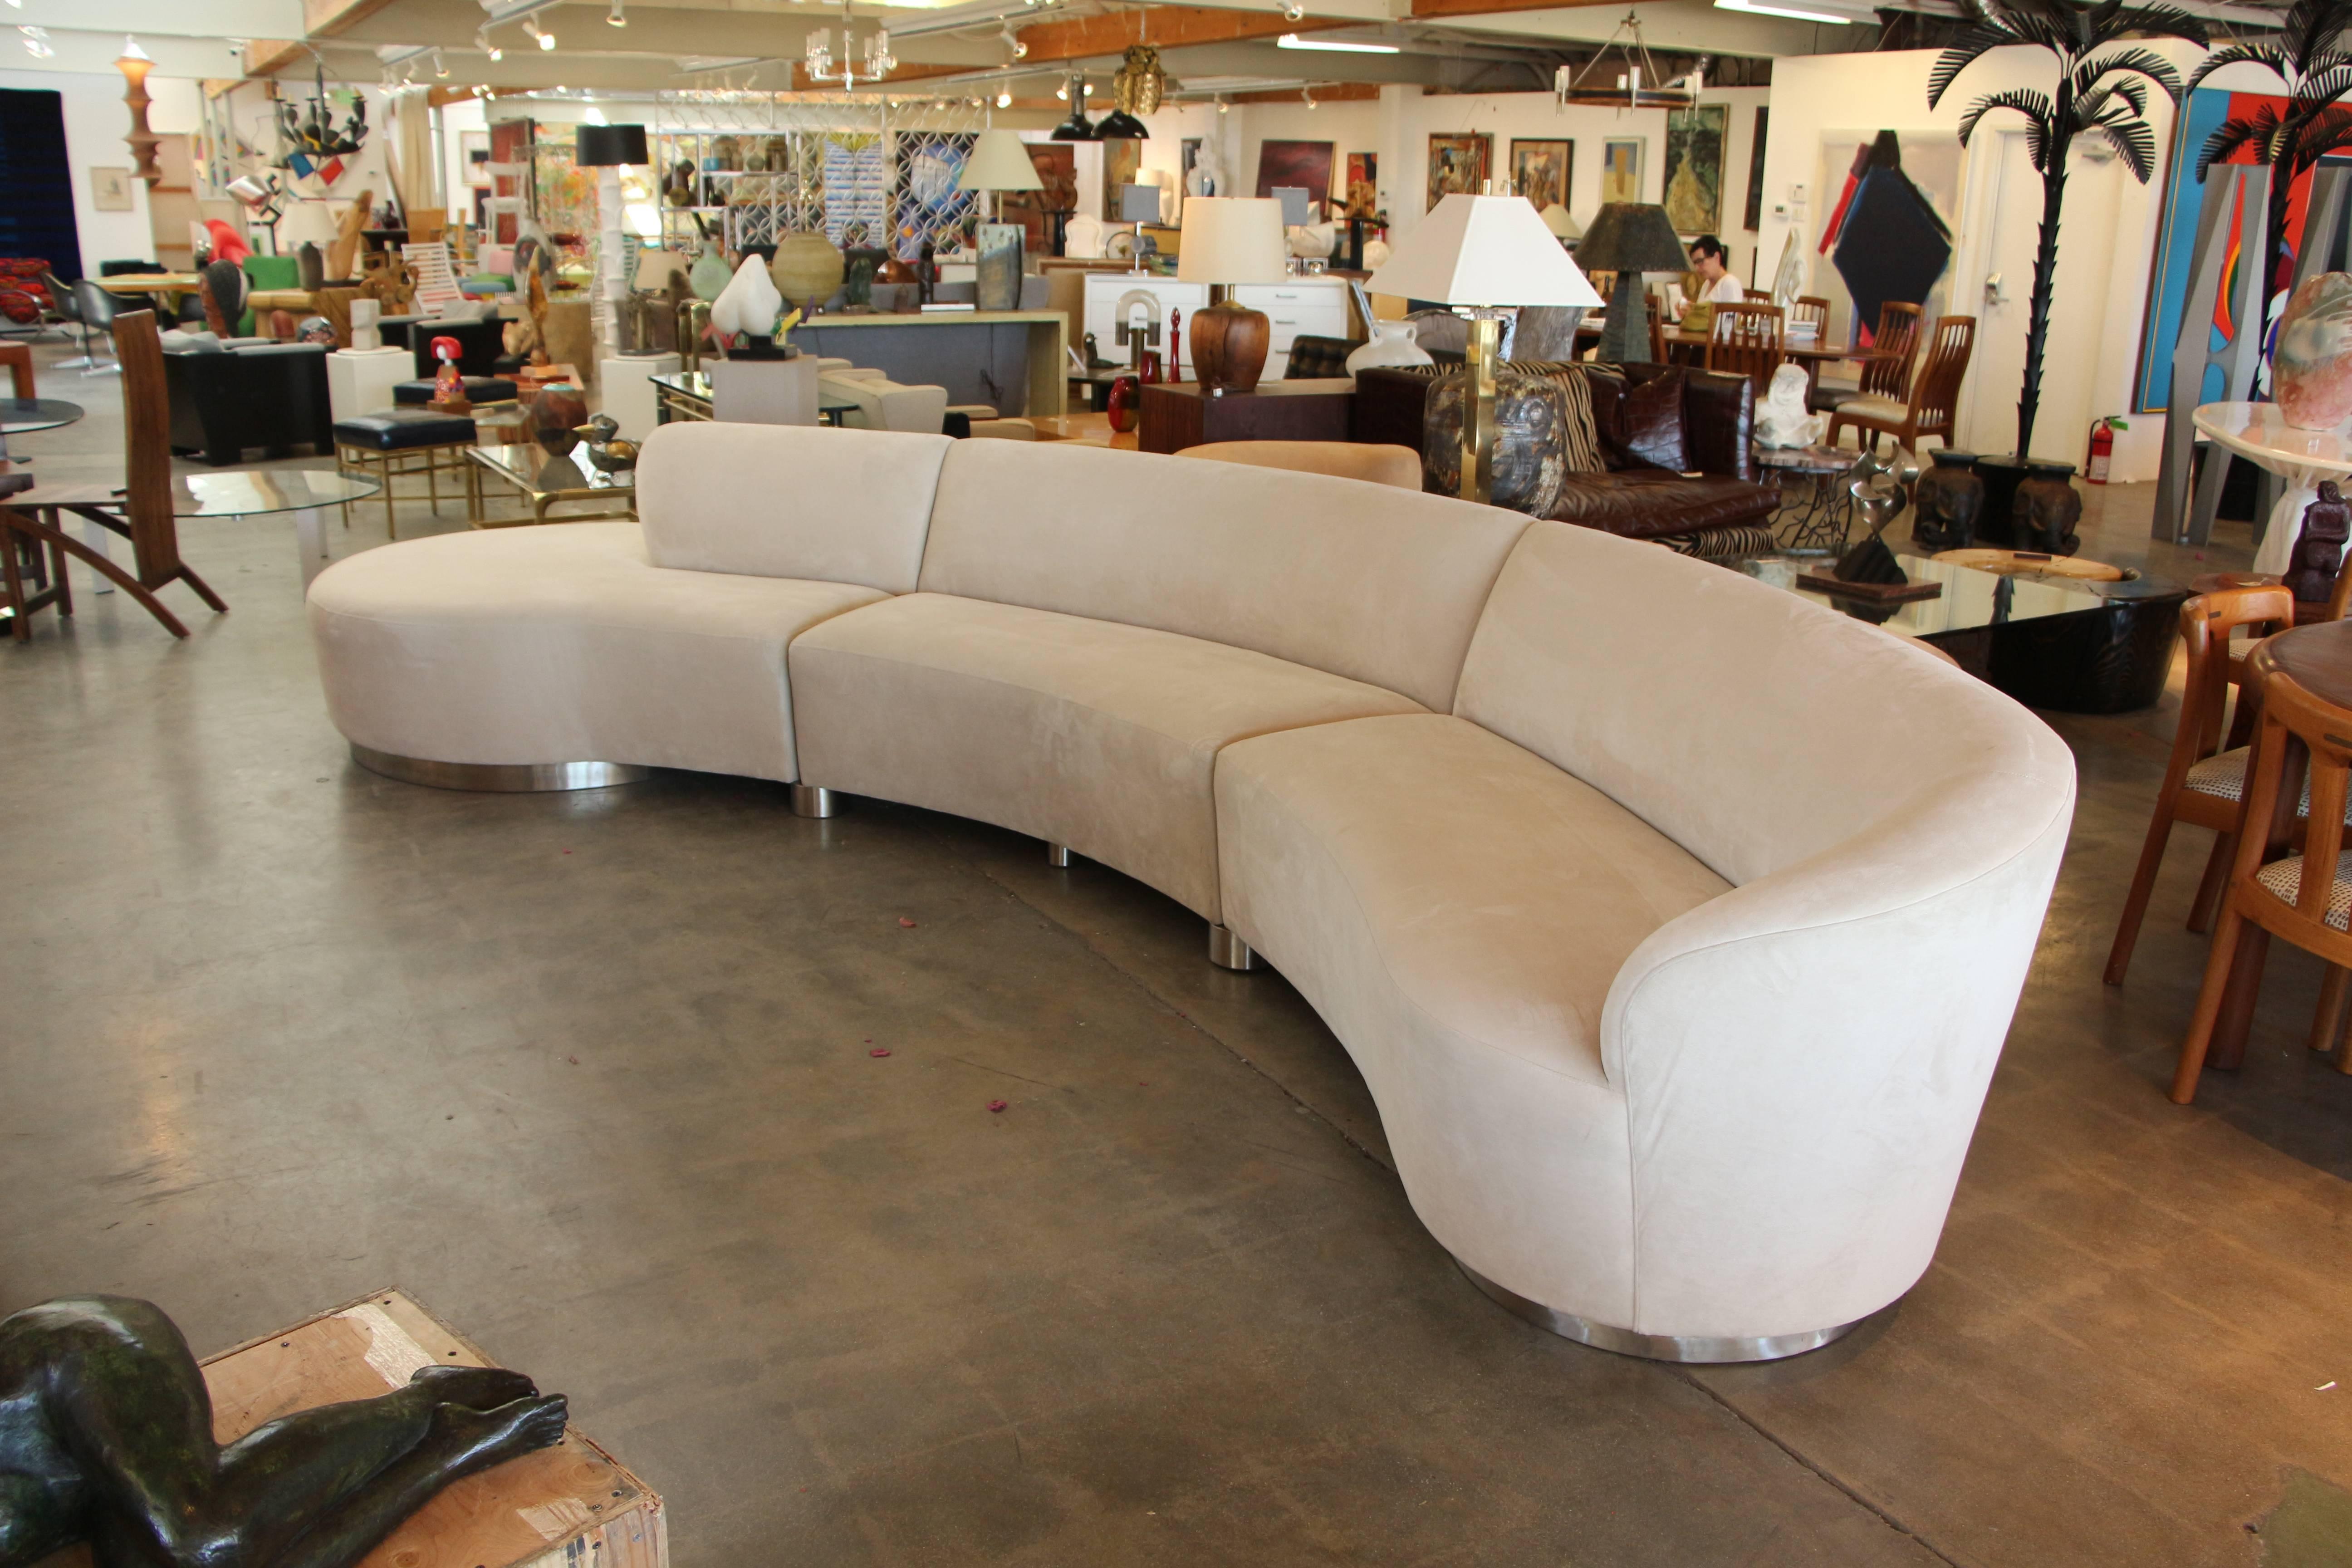 A monumental serpentine sectional sofa by Vladimir Kagan on brushed steel curved legs. Three sections with interlocking steel, pictured. Covered in a neutral Sand Ultra Suede. This sofa measures 15.5 feet from end to end. A lot longer along the